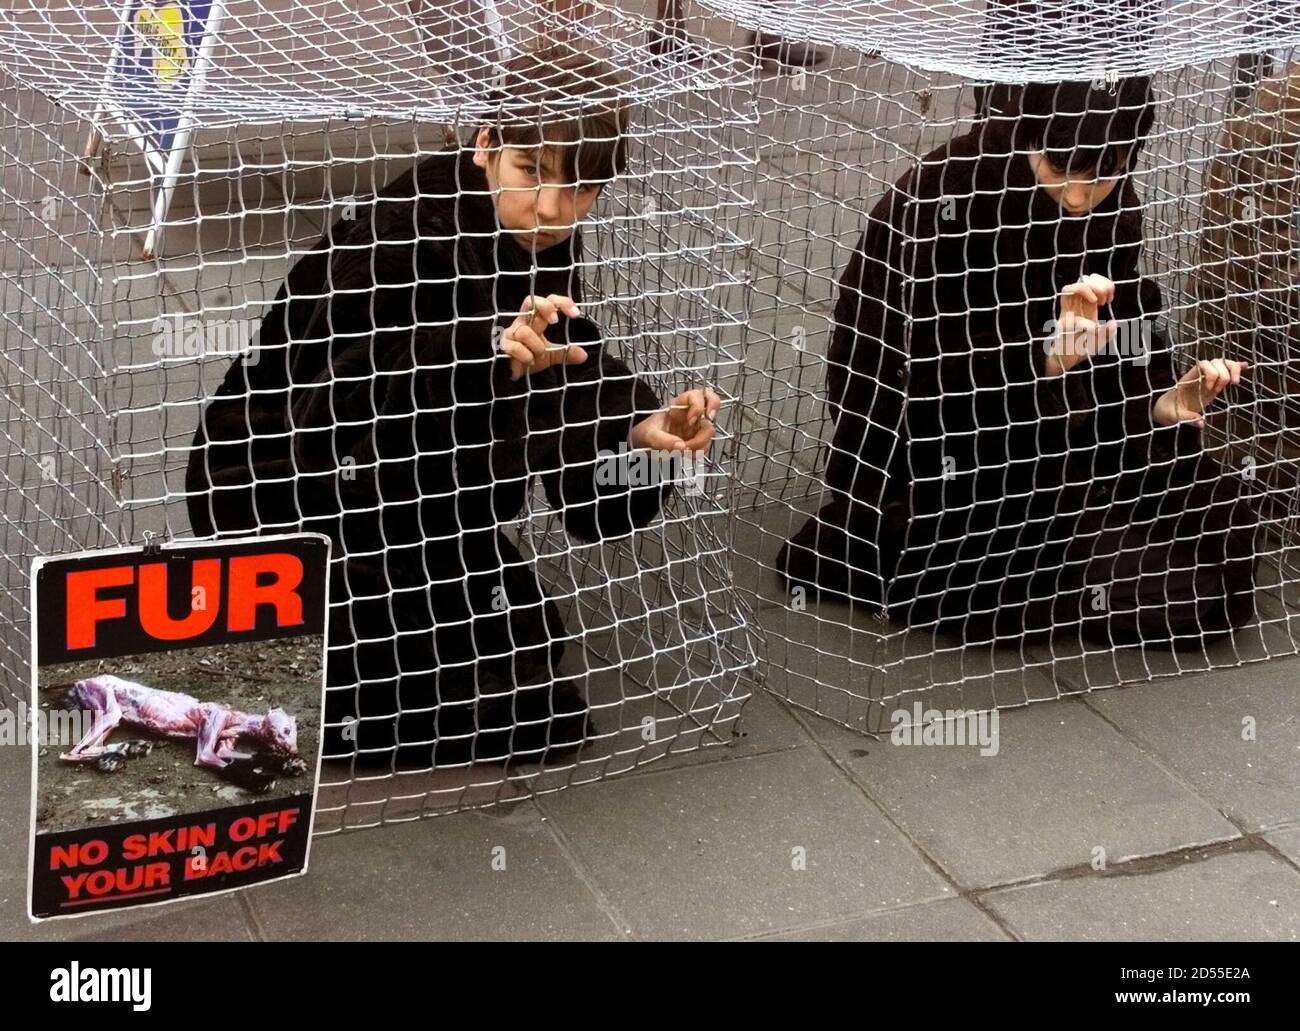 PETA members, wearing fur coats, sit inside wire cages during a protest  performance April 13. The People for the Ethical Treatment of Animals  (PETA) organisation held the action to show how cruelly